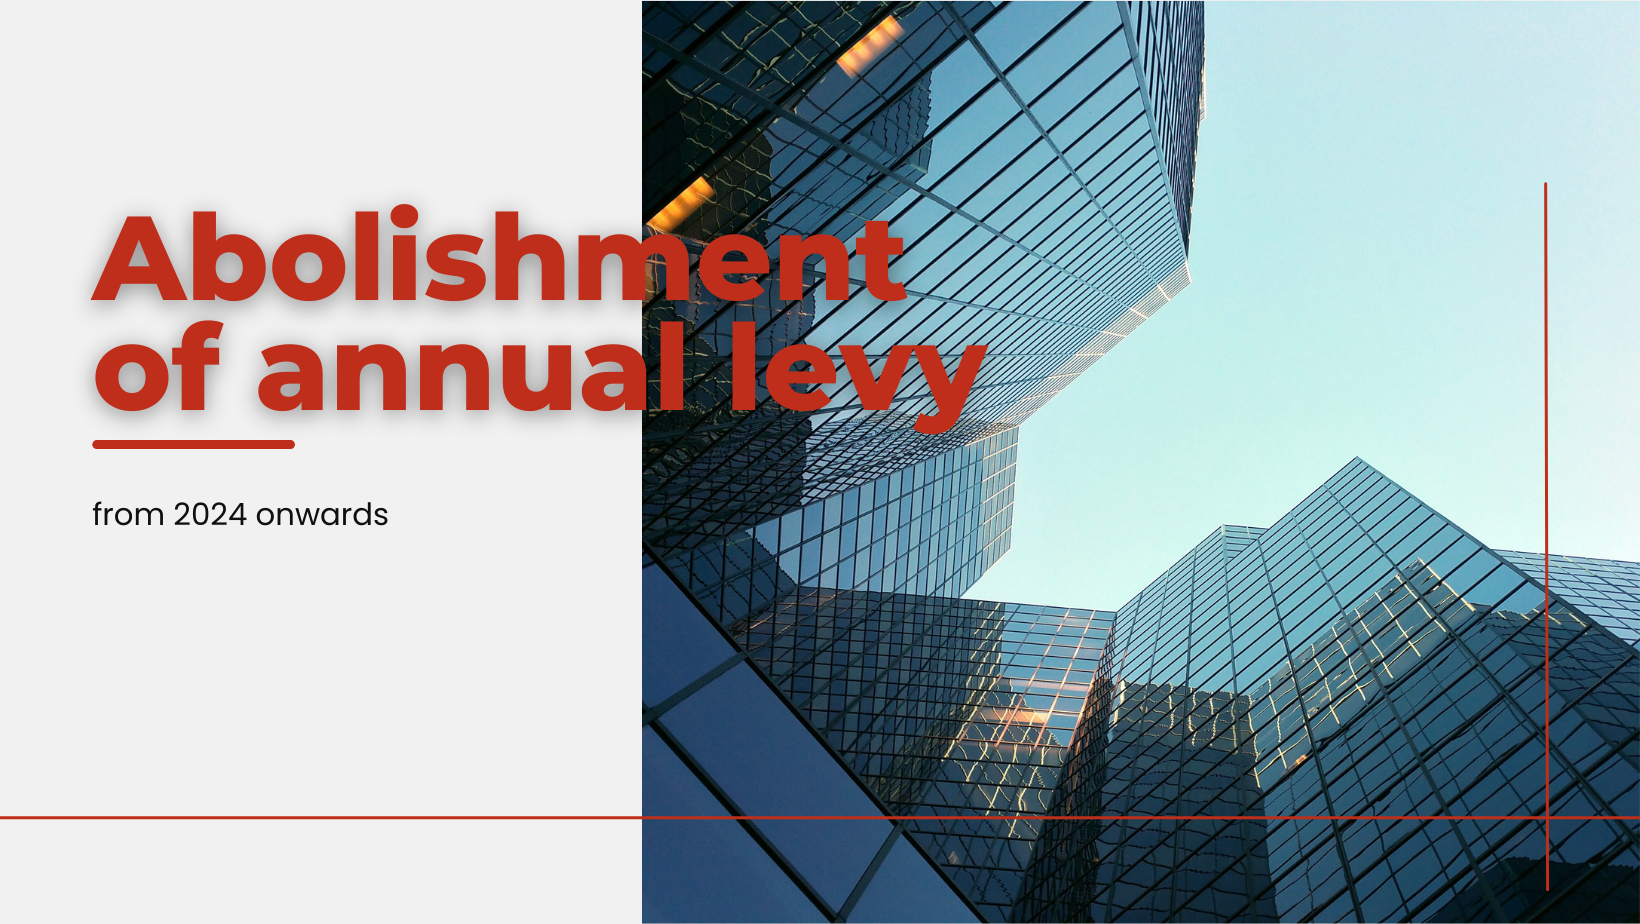 Abolishment of annual levy 